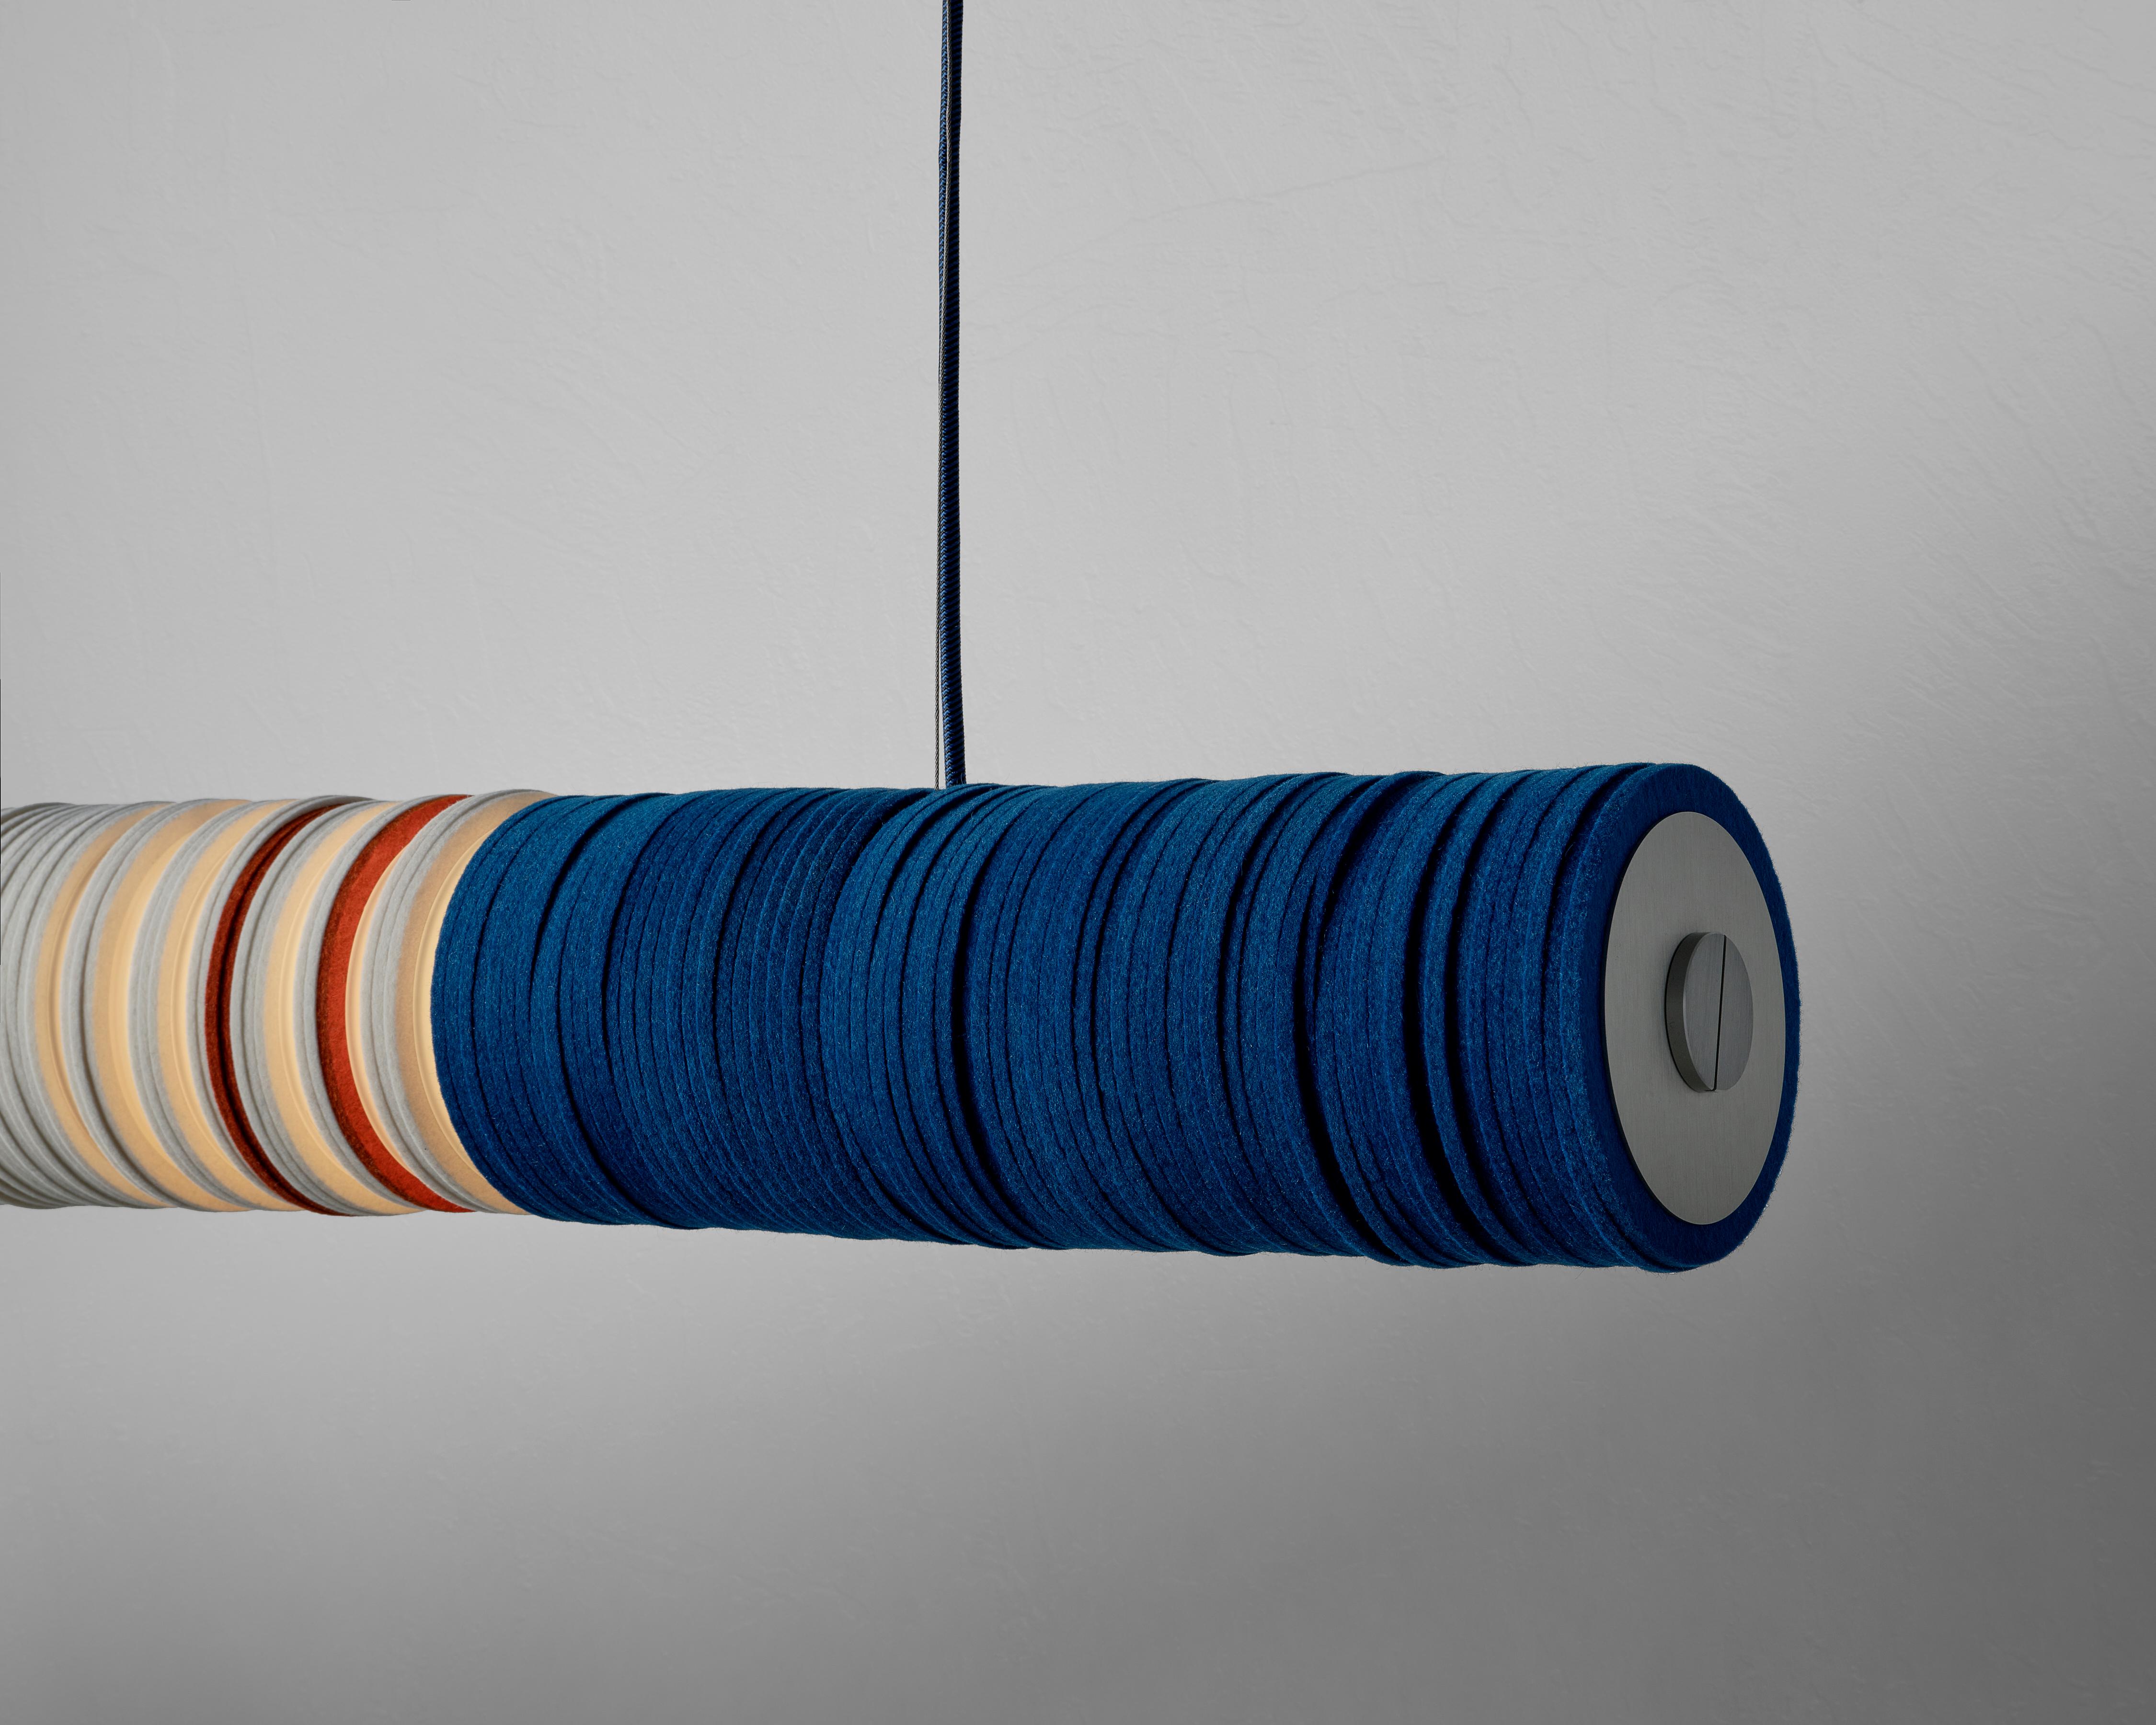 Canadian Contemporary Hanging Light in Felt, Sarah Coleman in Stackabl, Canada, 2022 For Sale